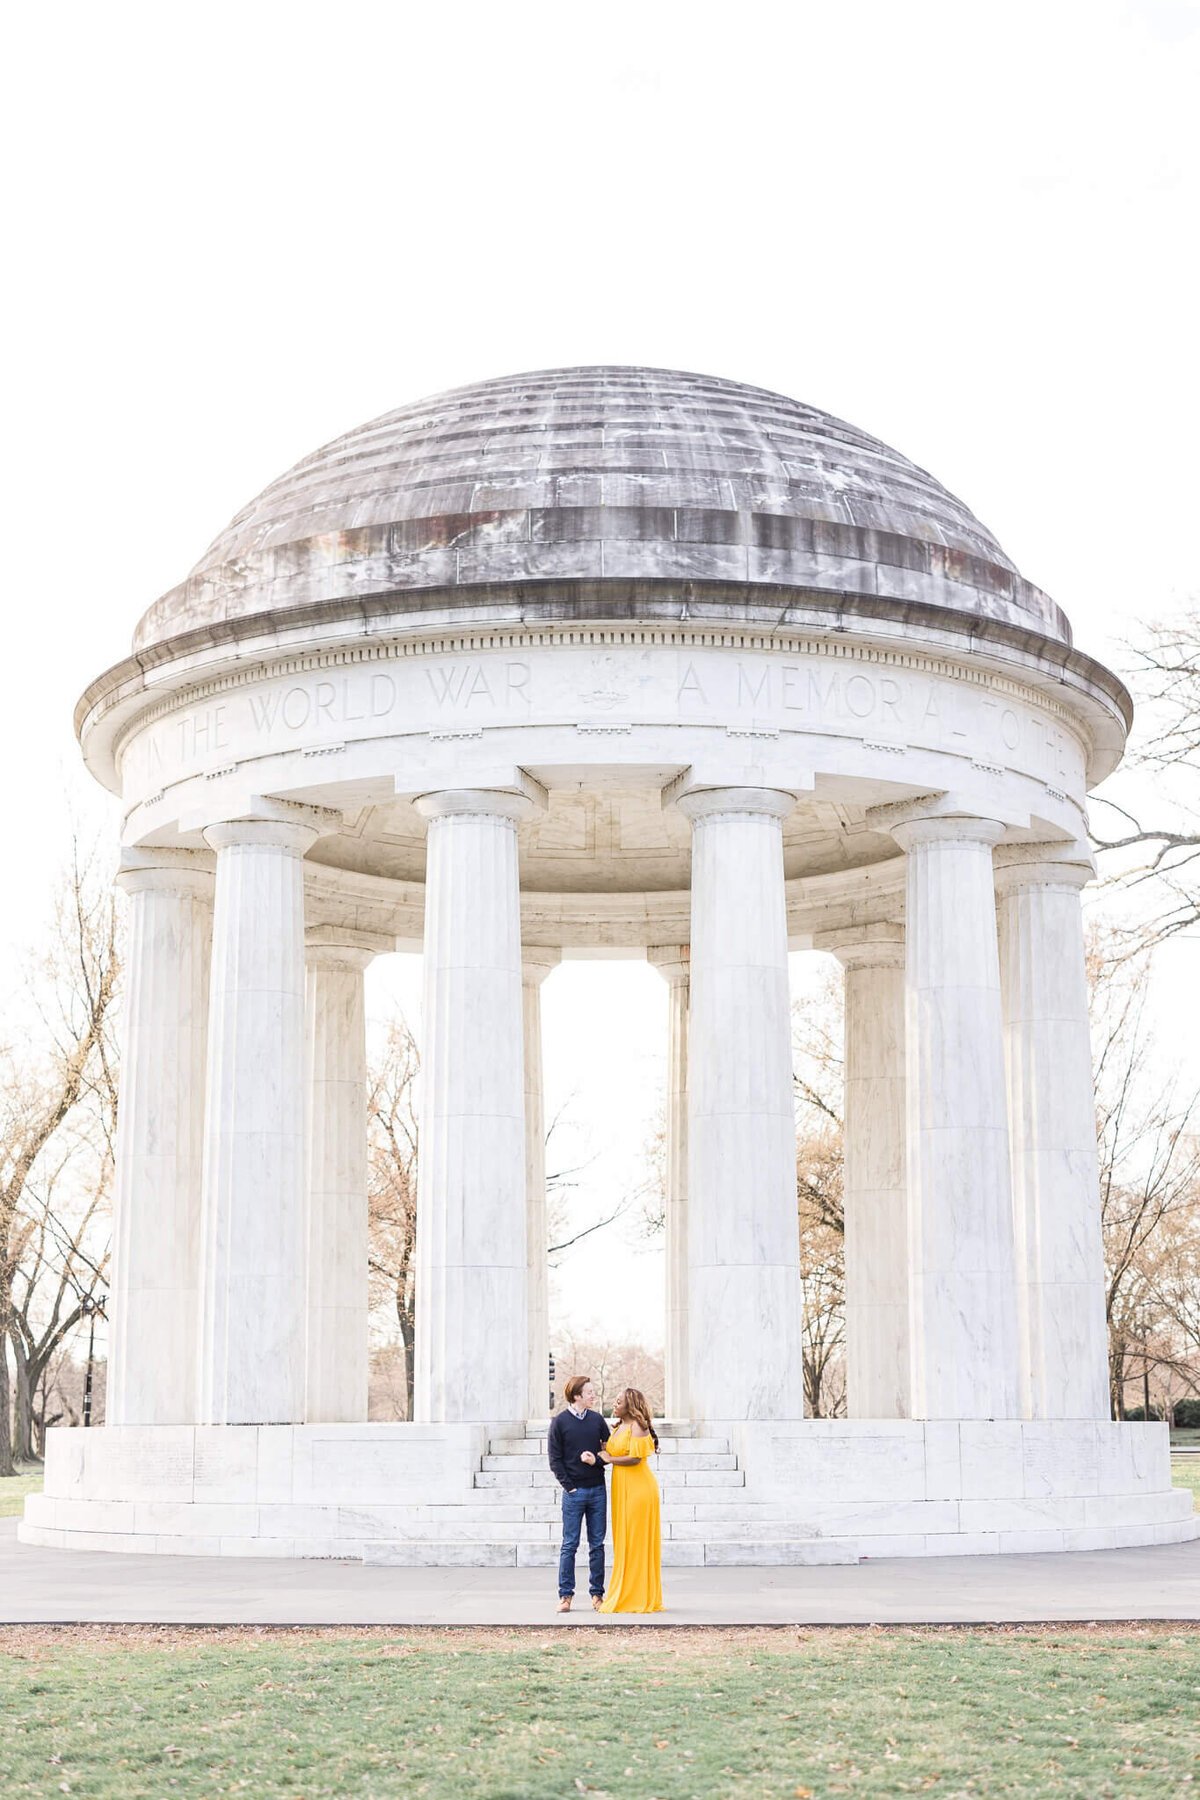 engagement-photography-session-lincoln-memorial-DC-WAR-MEMORIAL-WW2-MEMORIAL-LIGHT-AIRY-interatial-couple-black-woman-white-man-24